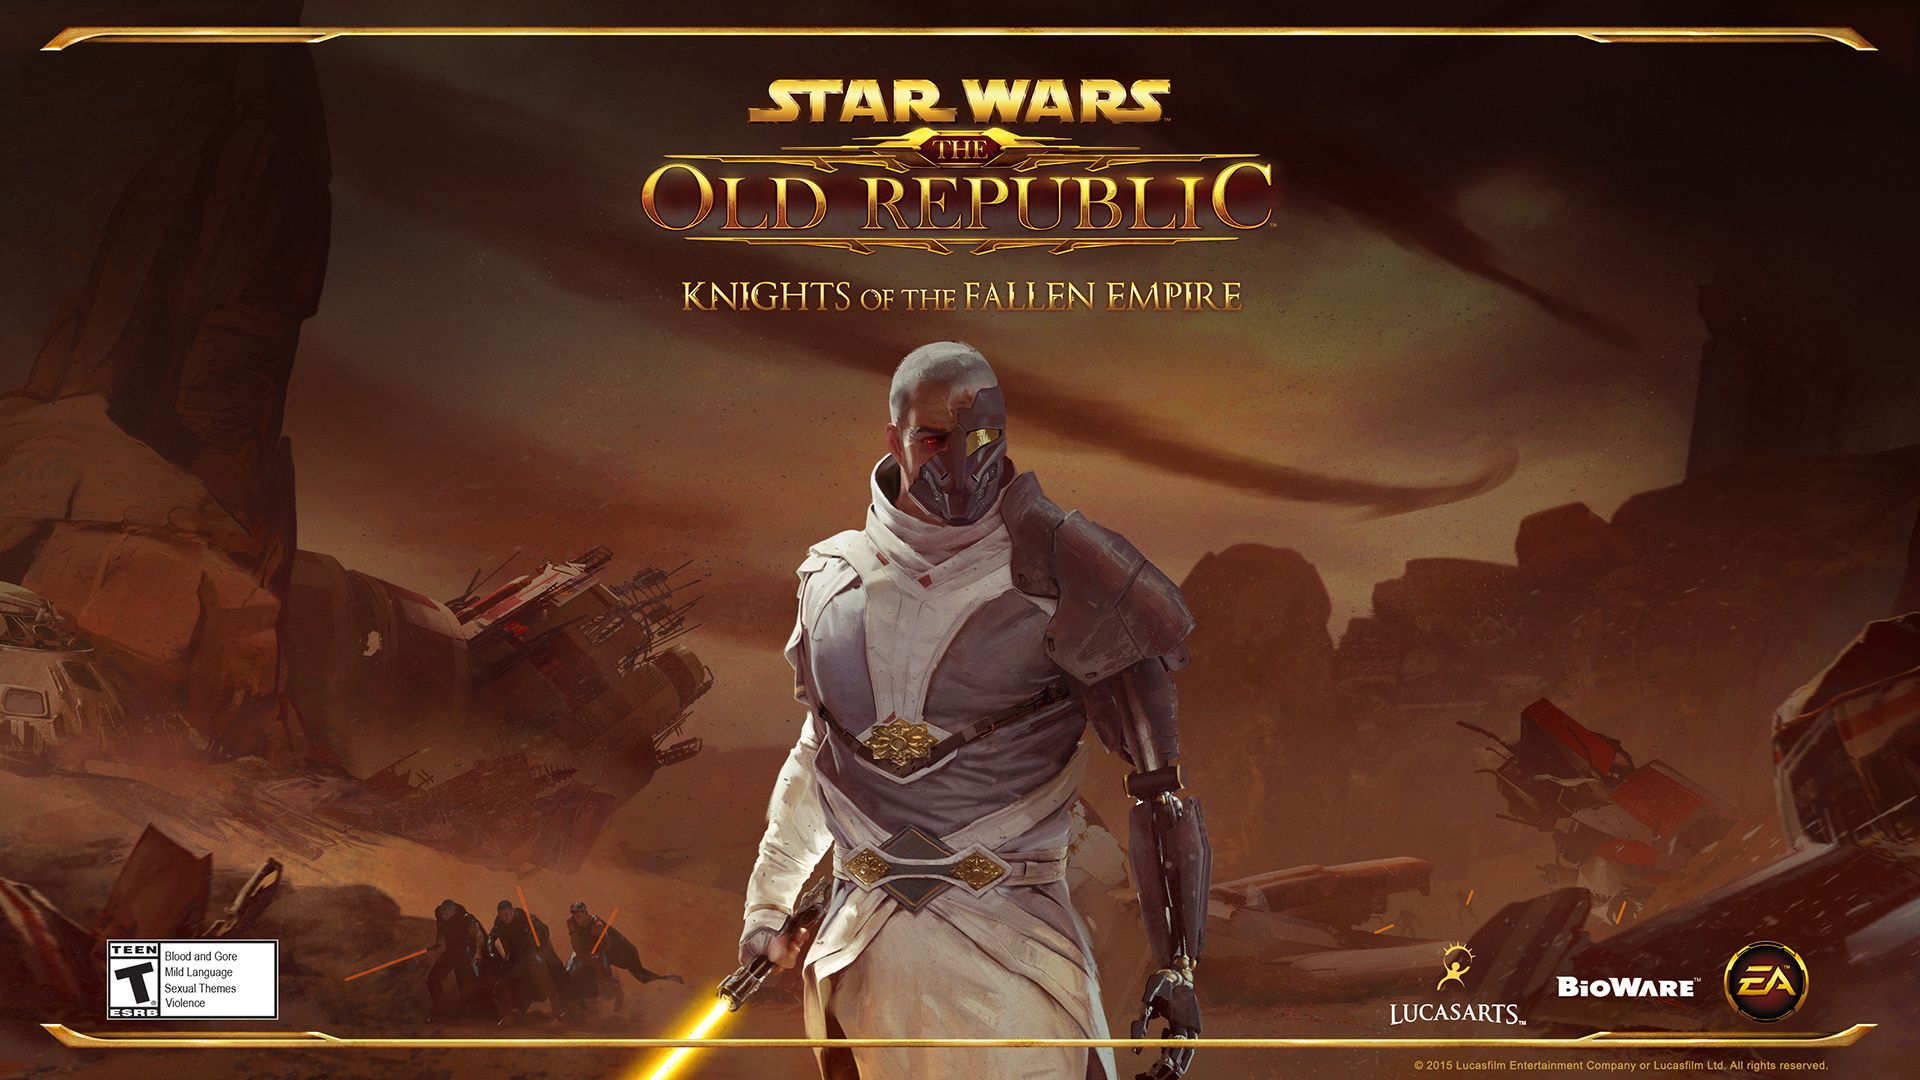 Star Wars: The Old Republic Wallpapers